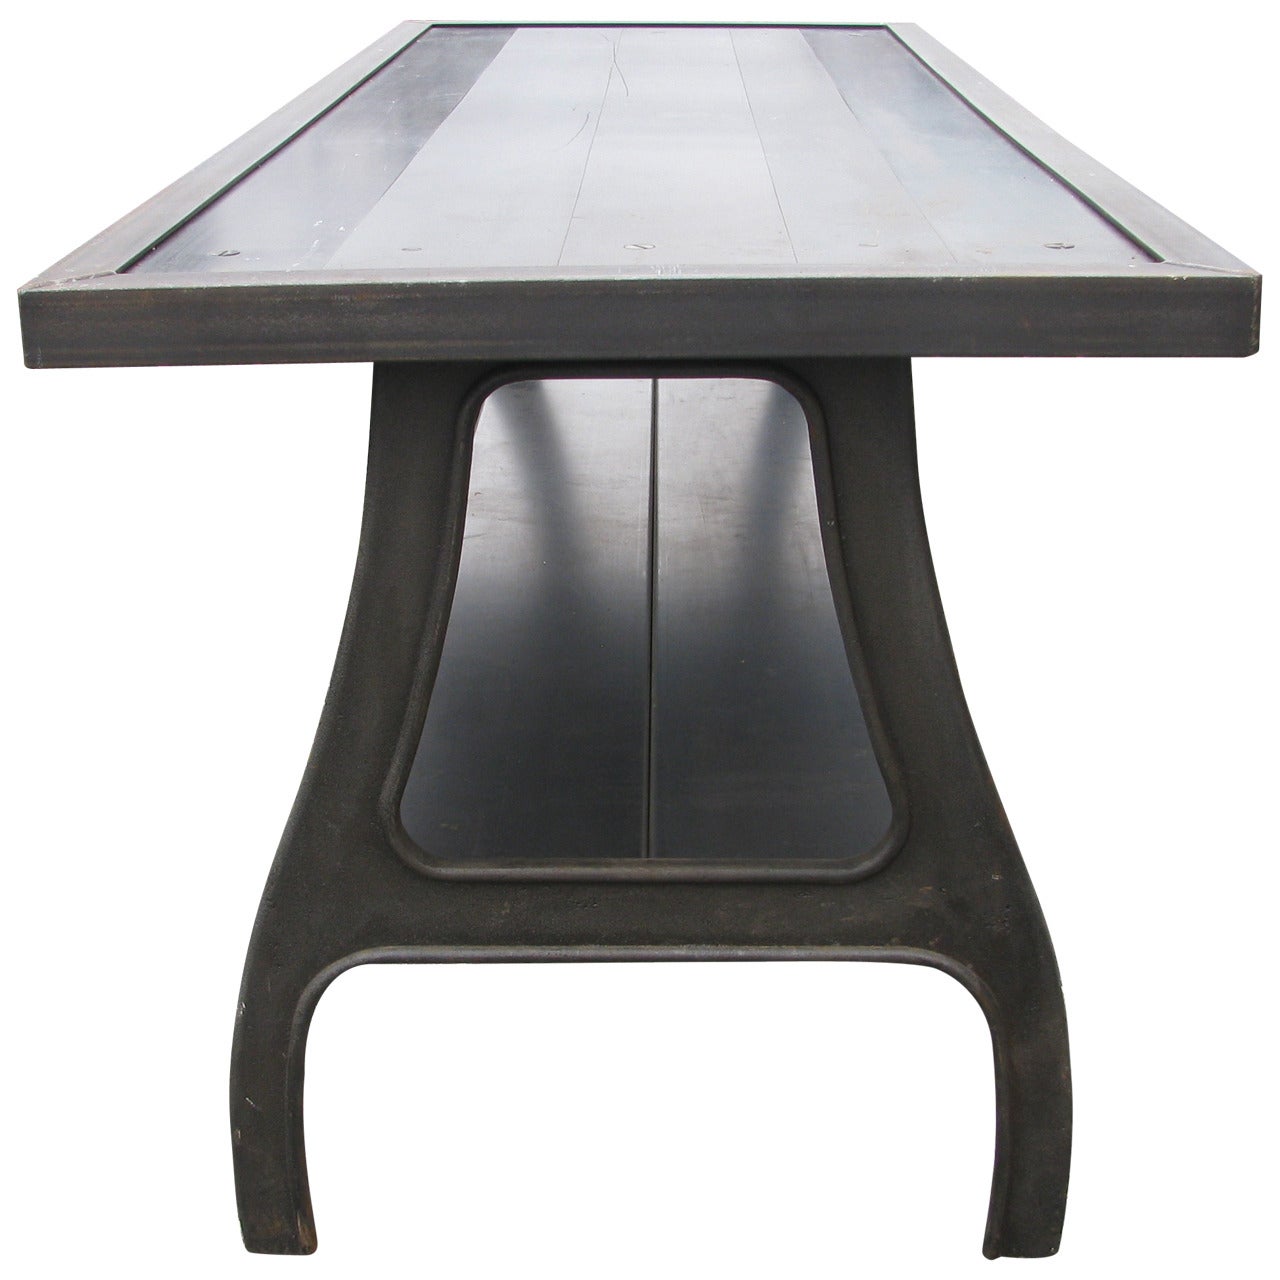 Fabulous Seven Foot Cast Iron And Steel Dining Table